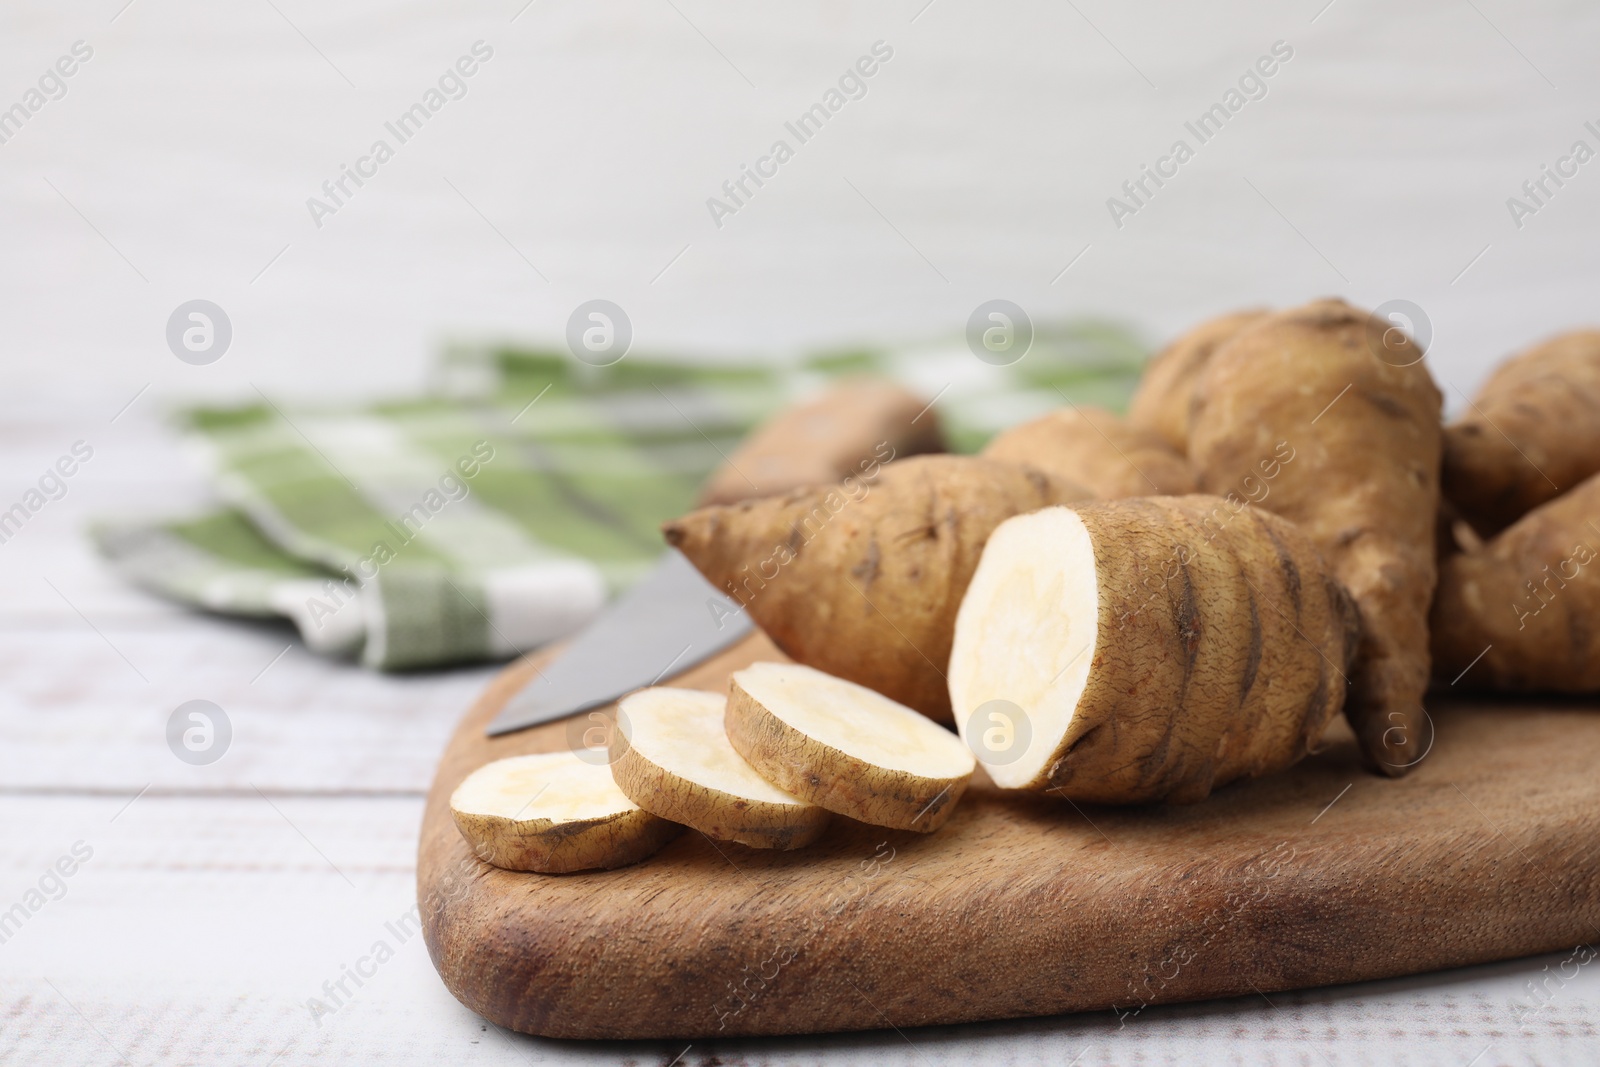 Photo of Whole and cut turnip rooted chervil tubers on light wooden table, closeup. Space for text